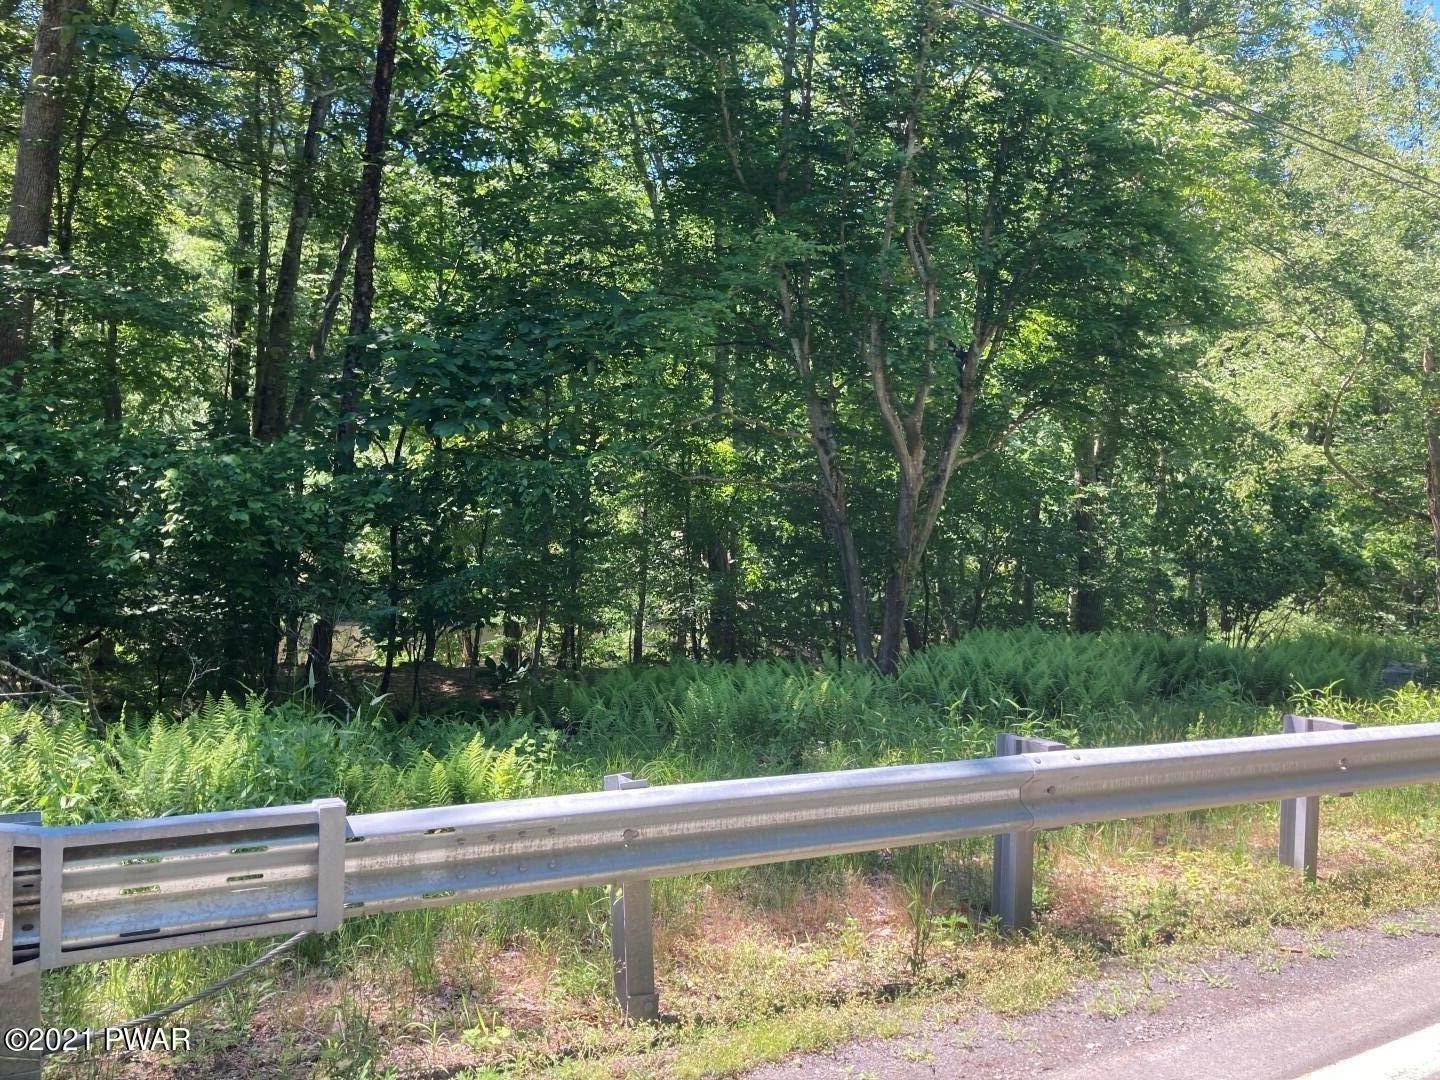 7. Land for Sale at Pa Route 590 Lackawaxen, Pennsylvania 18435 United States